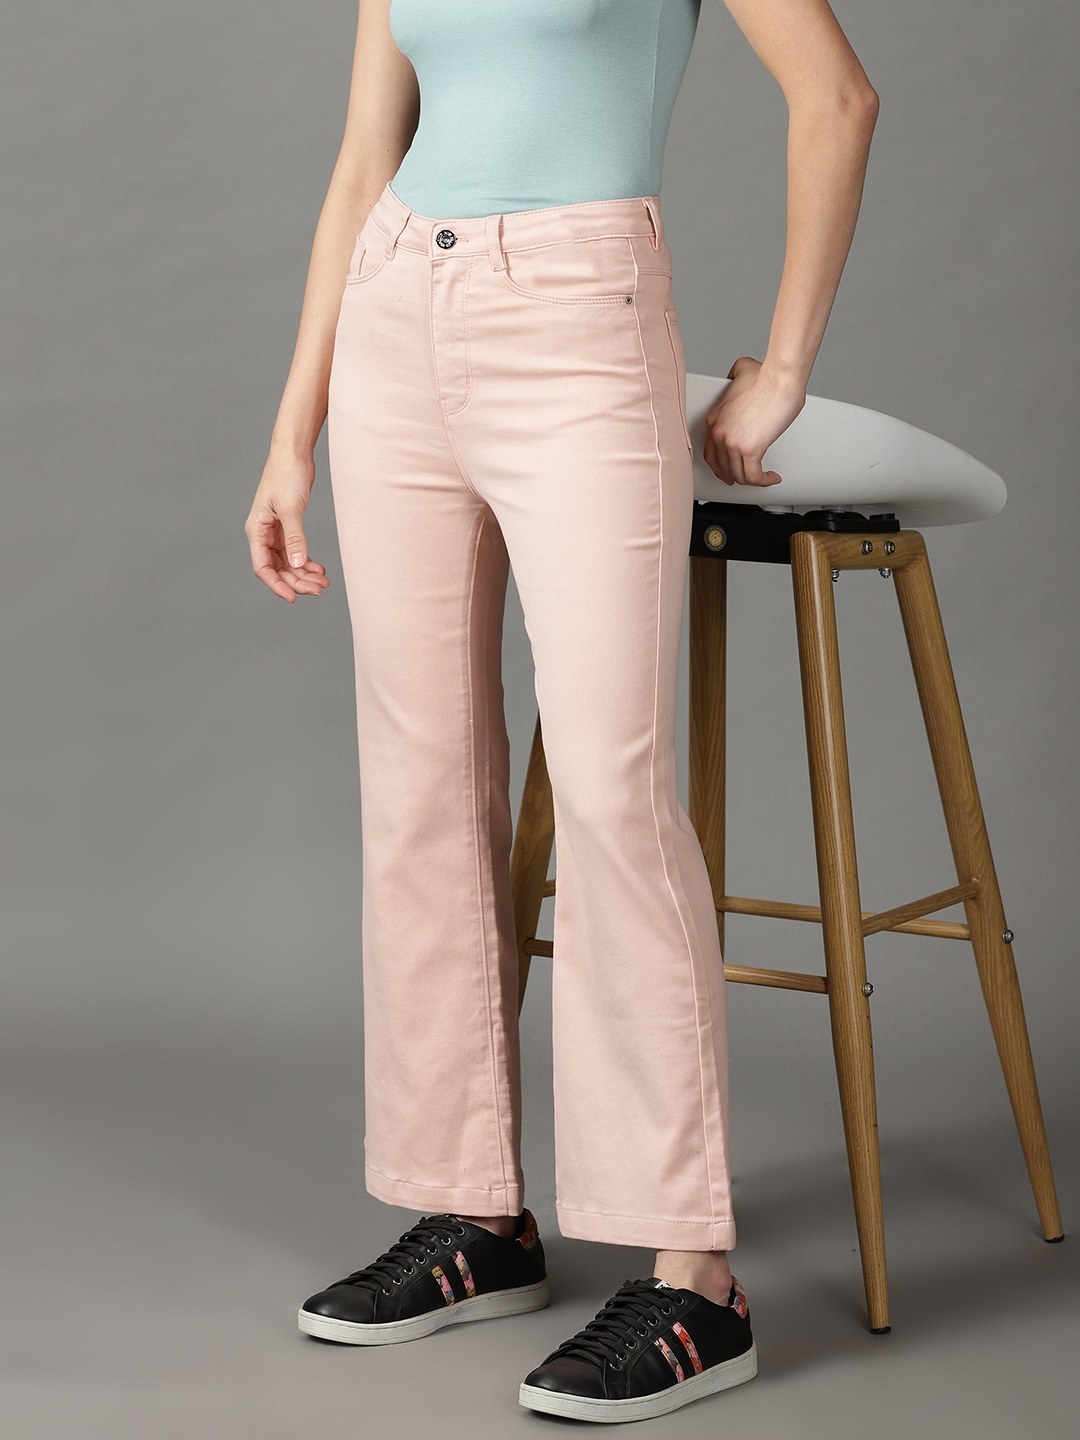 Showoff | SHOWOFF Women Peach Solid  Bootcut Jeans 0